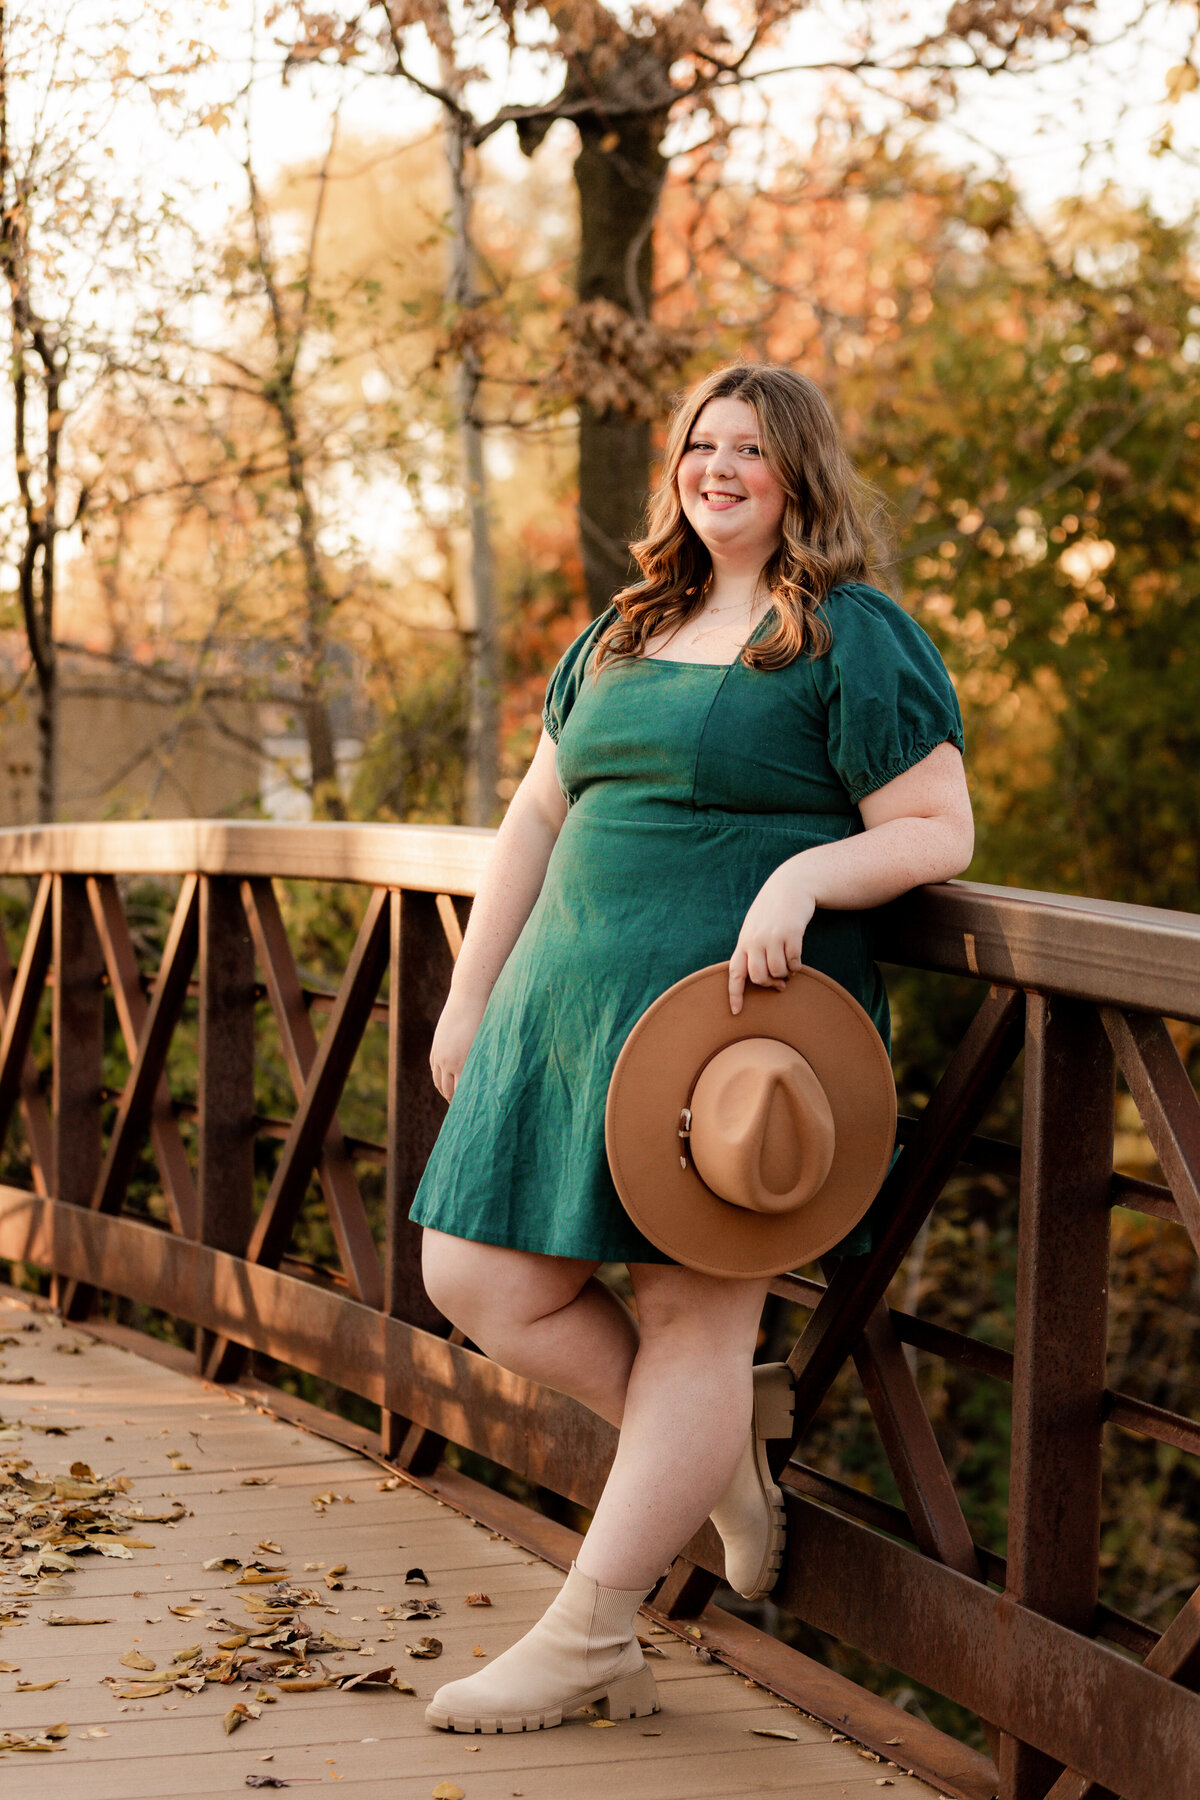 Claire holds her hat by her side while she leans against a brown bridge in a green dress.